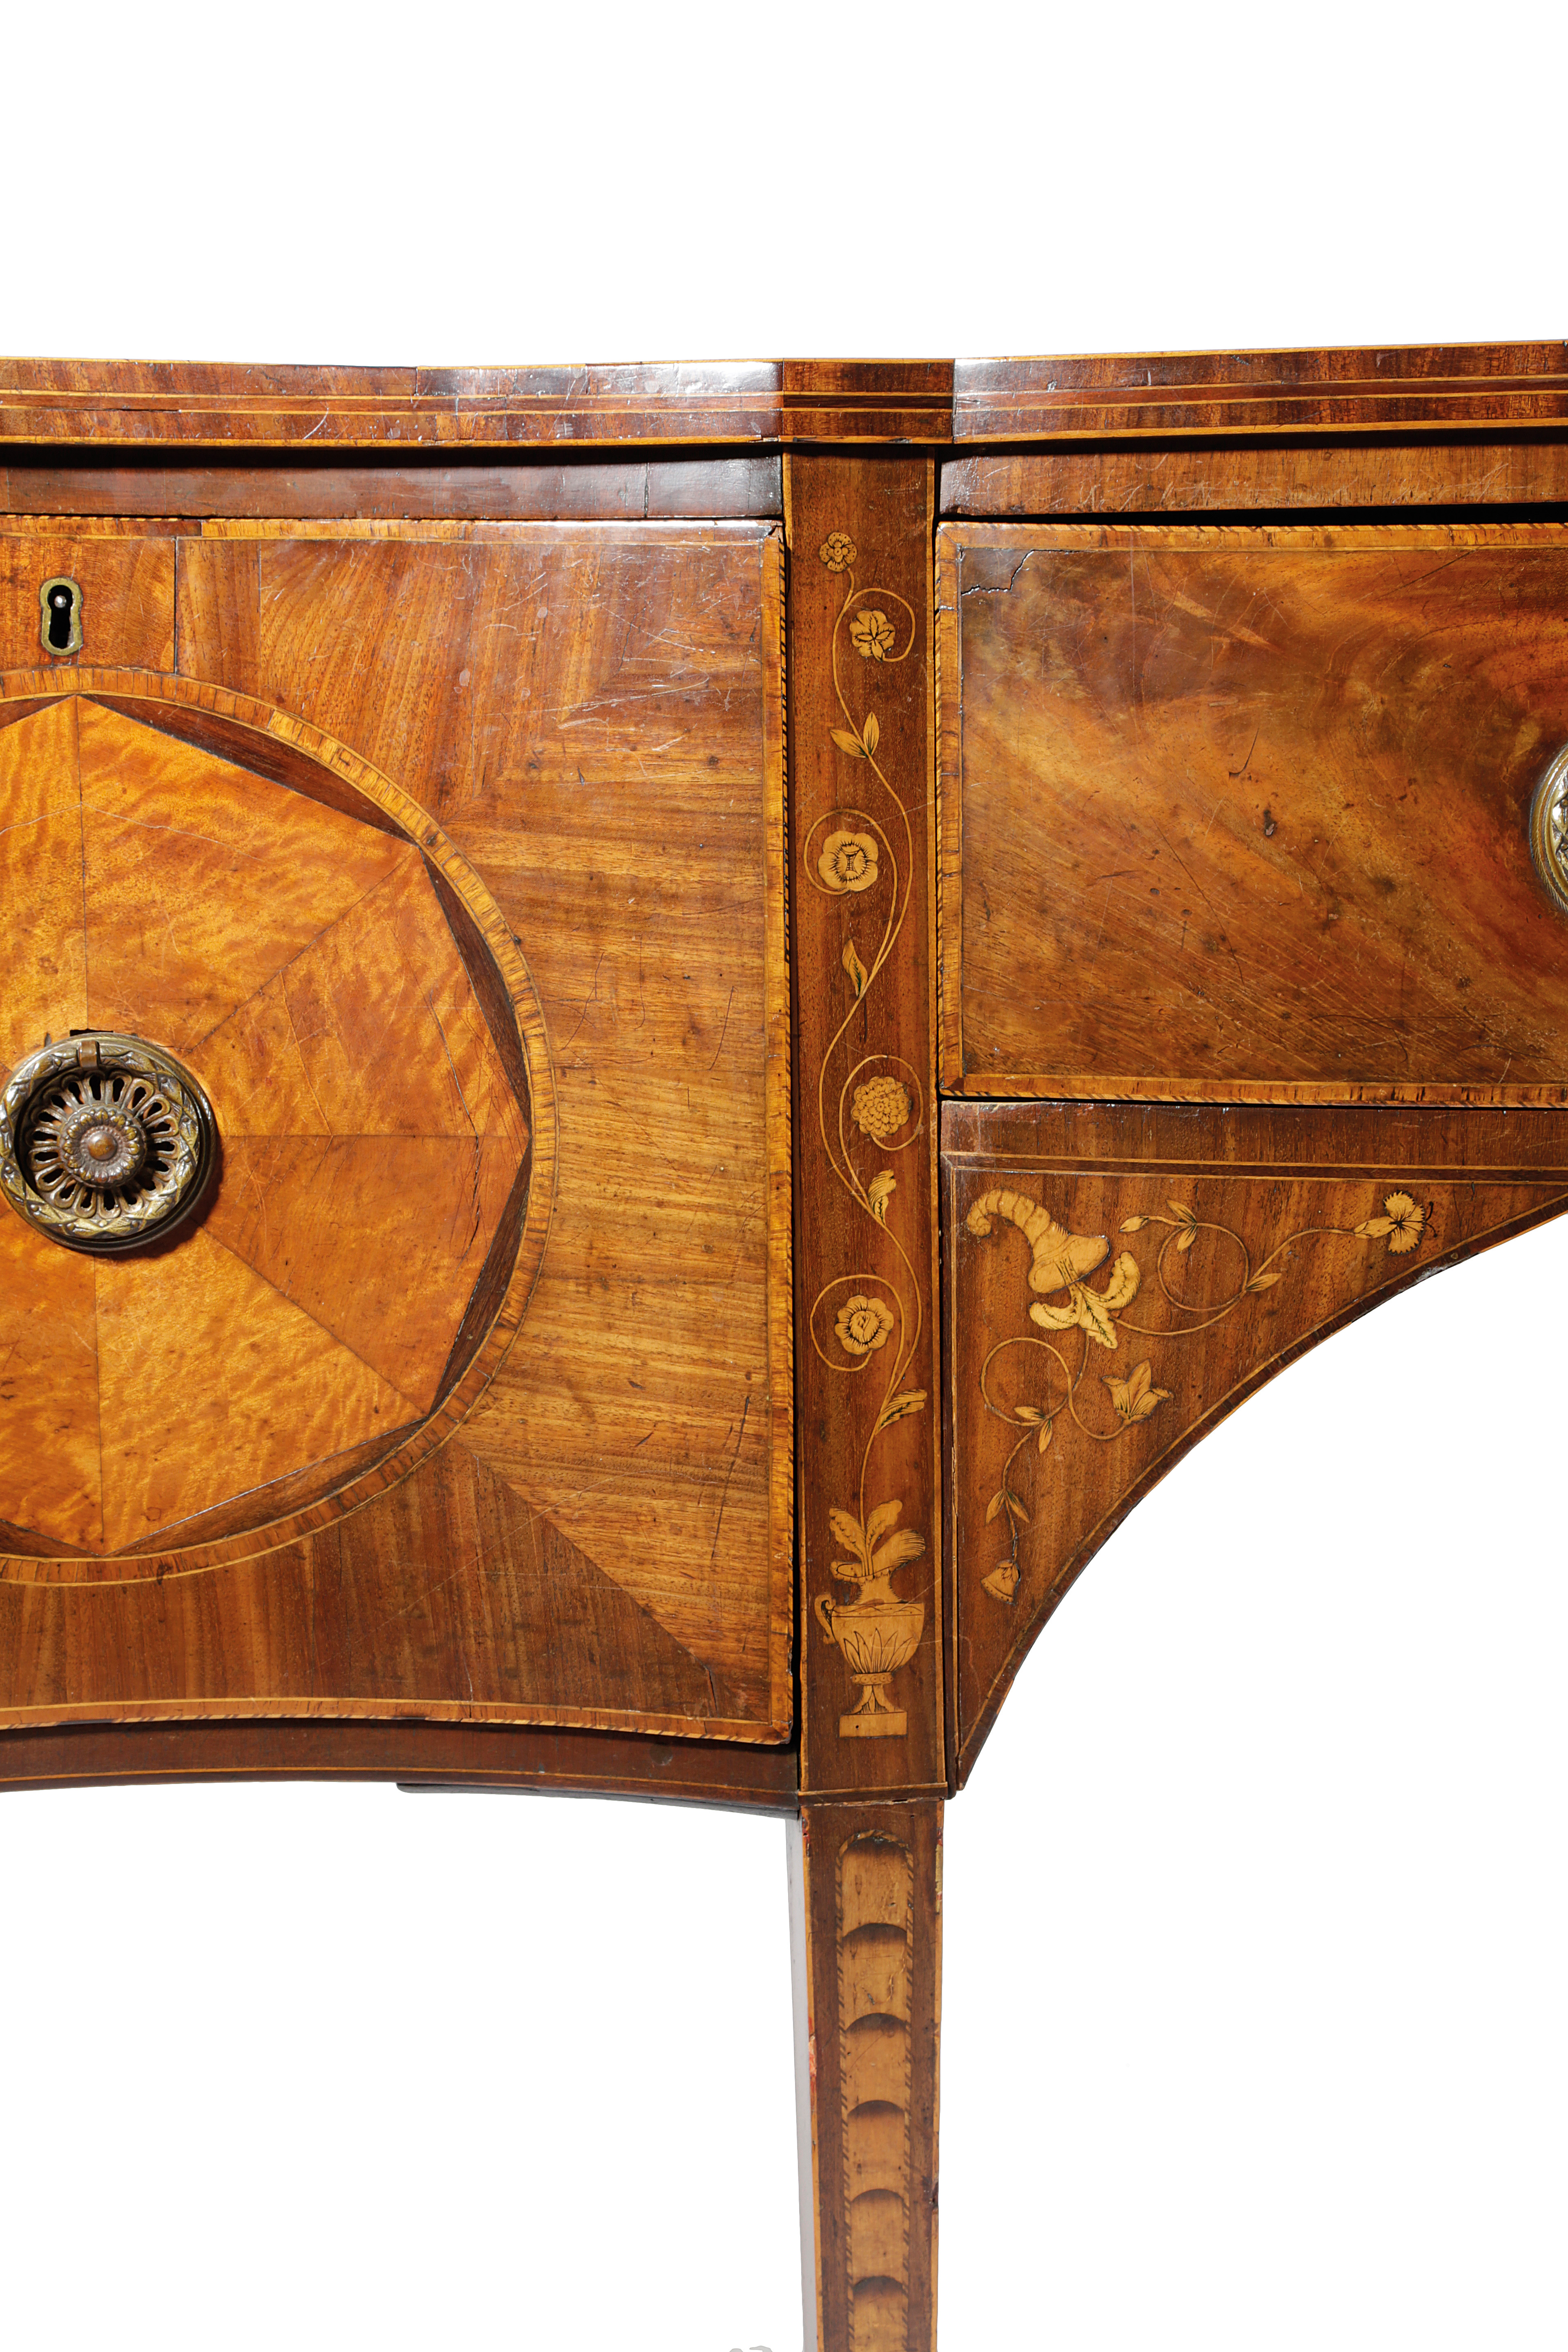 A GEORGE III MAHOGANY AND MARQUETRY SERPENTINE SIDEBOARD PROBABLY IRISH, LATE 18TH CENTURY AND LATER - Image 3 of 3